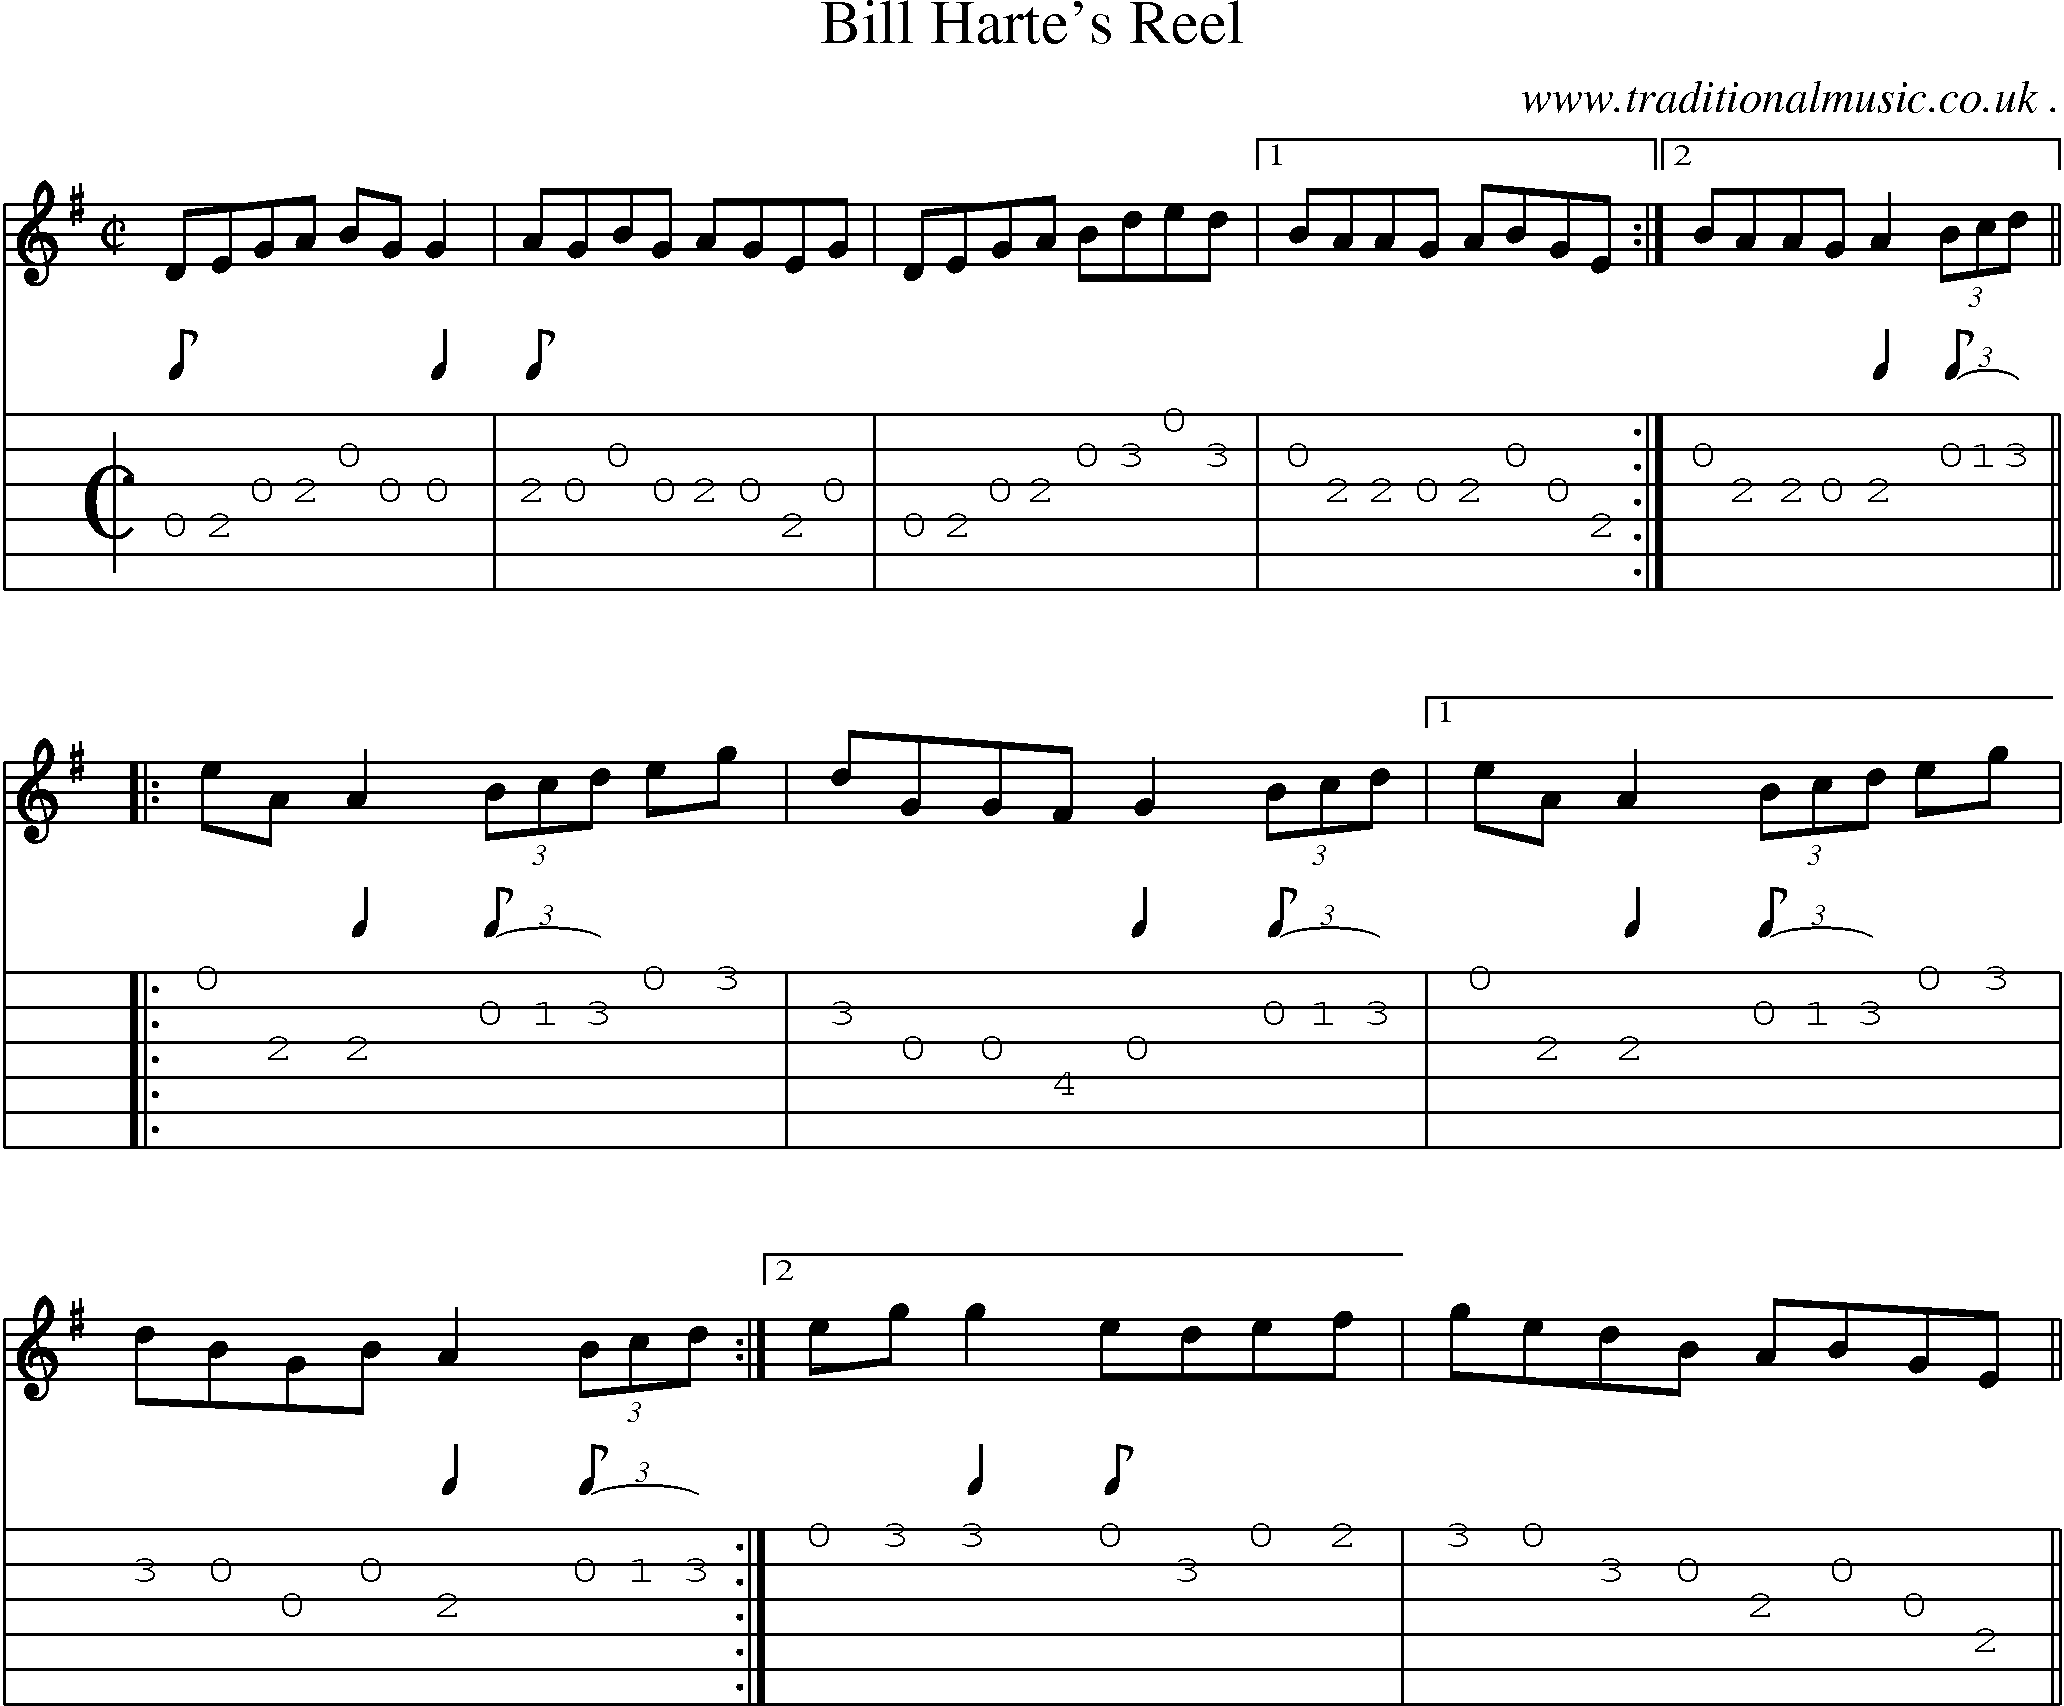 Sheet-Music and Guitar Tabs for Bill Hartes Reel